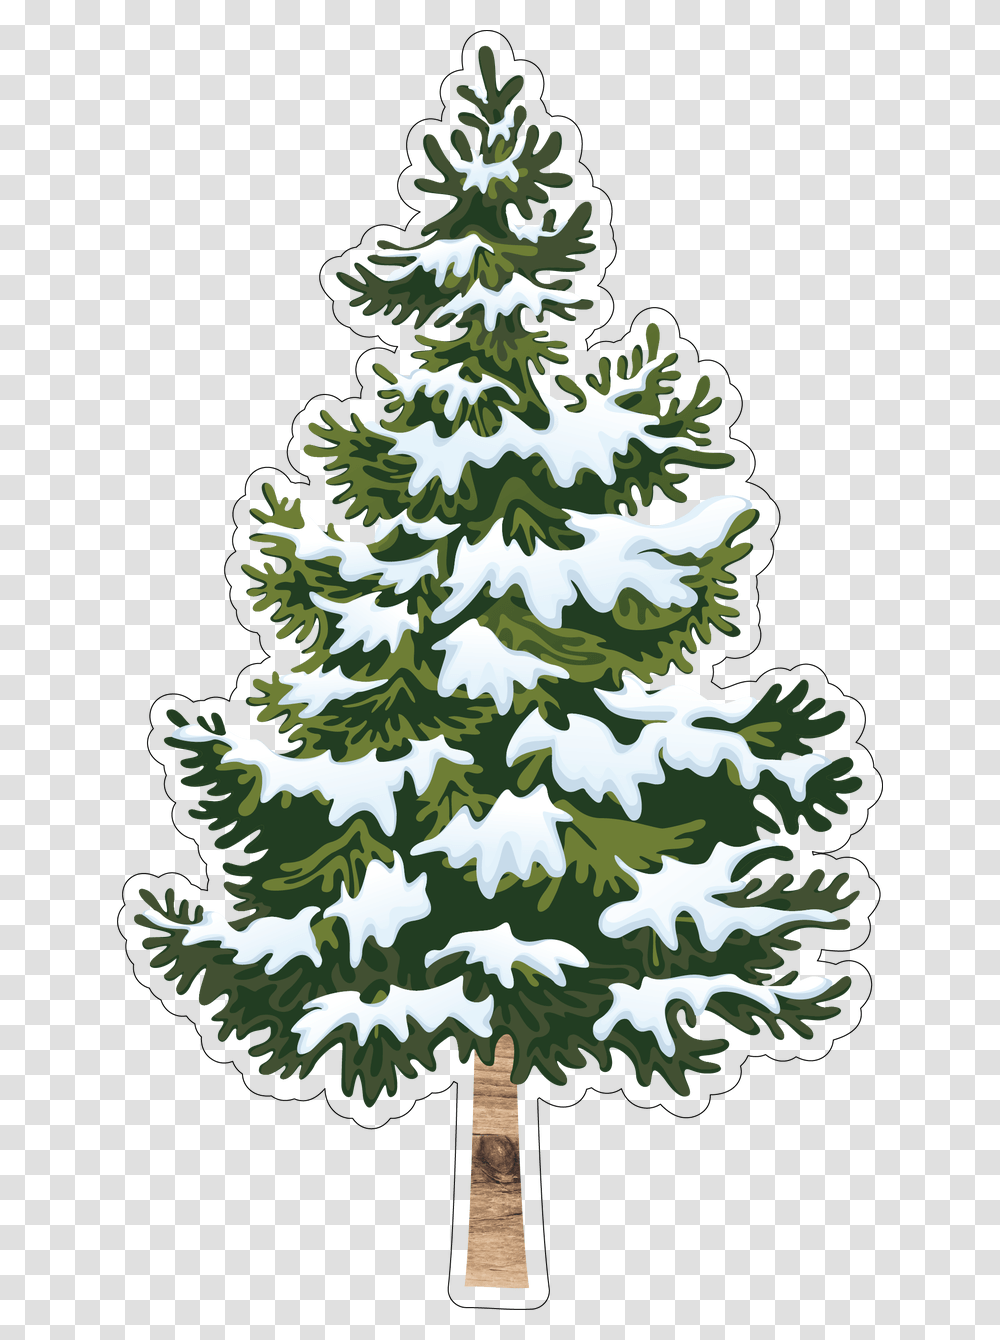 Let It Snow Tree Print Amp Cut File Fir Tree Christmas Vector, Plant, Ornament, Christmas Tree, Pine Transparent Png